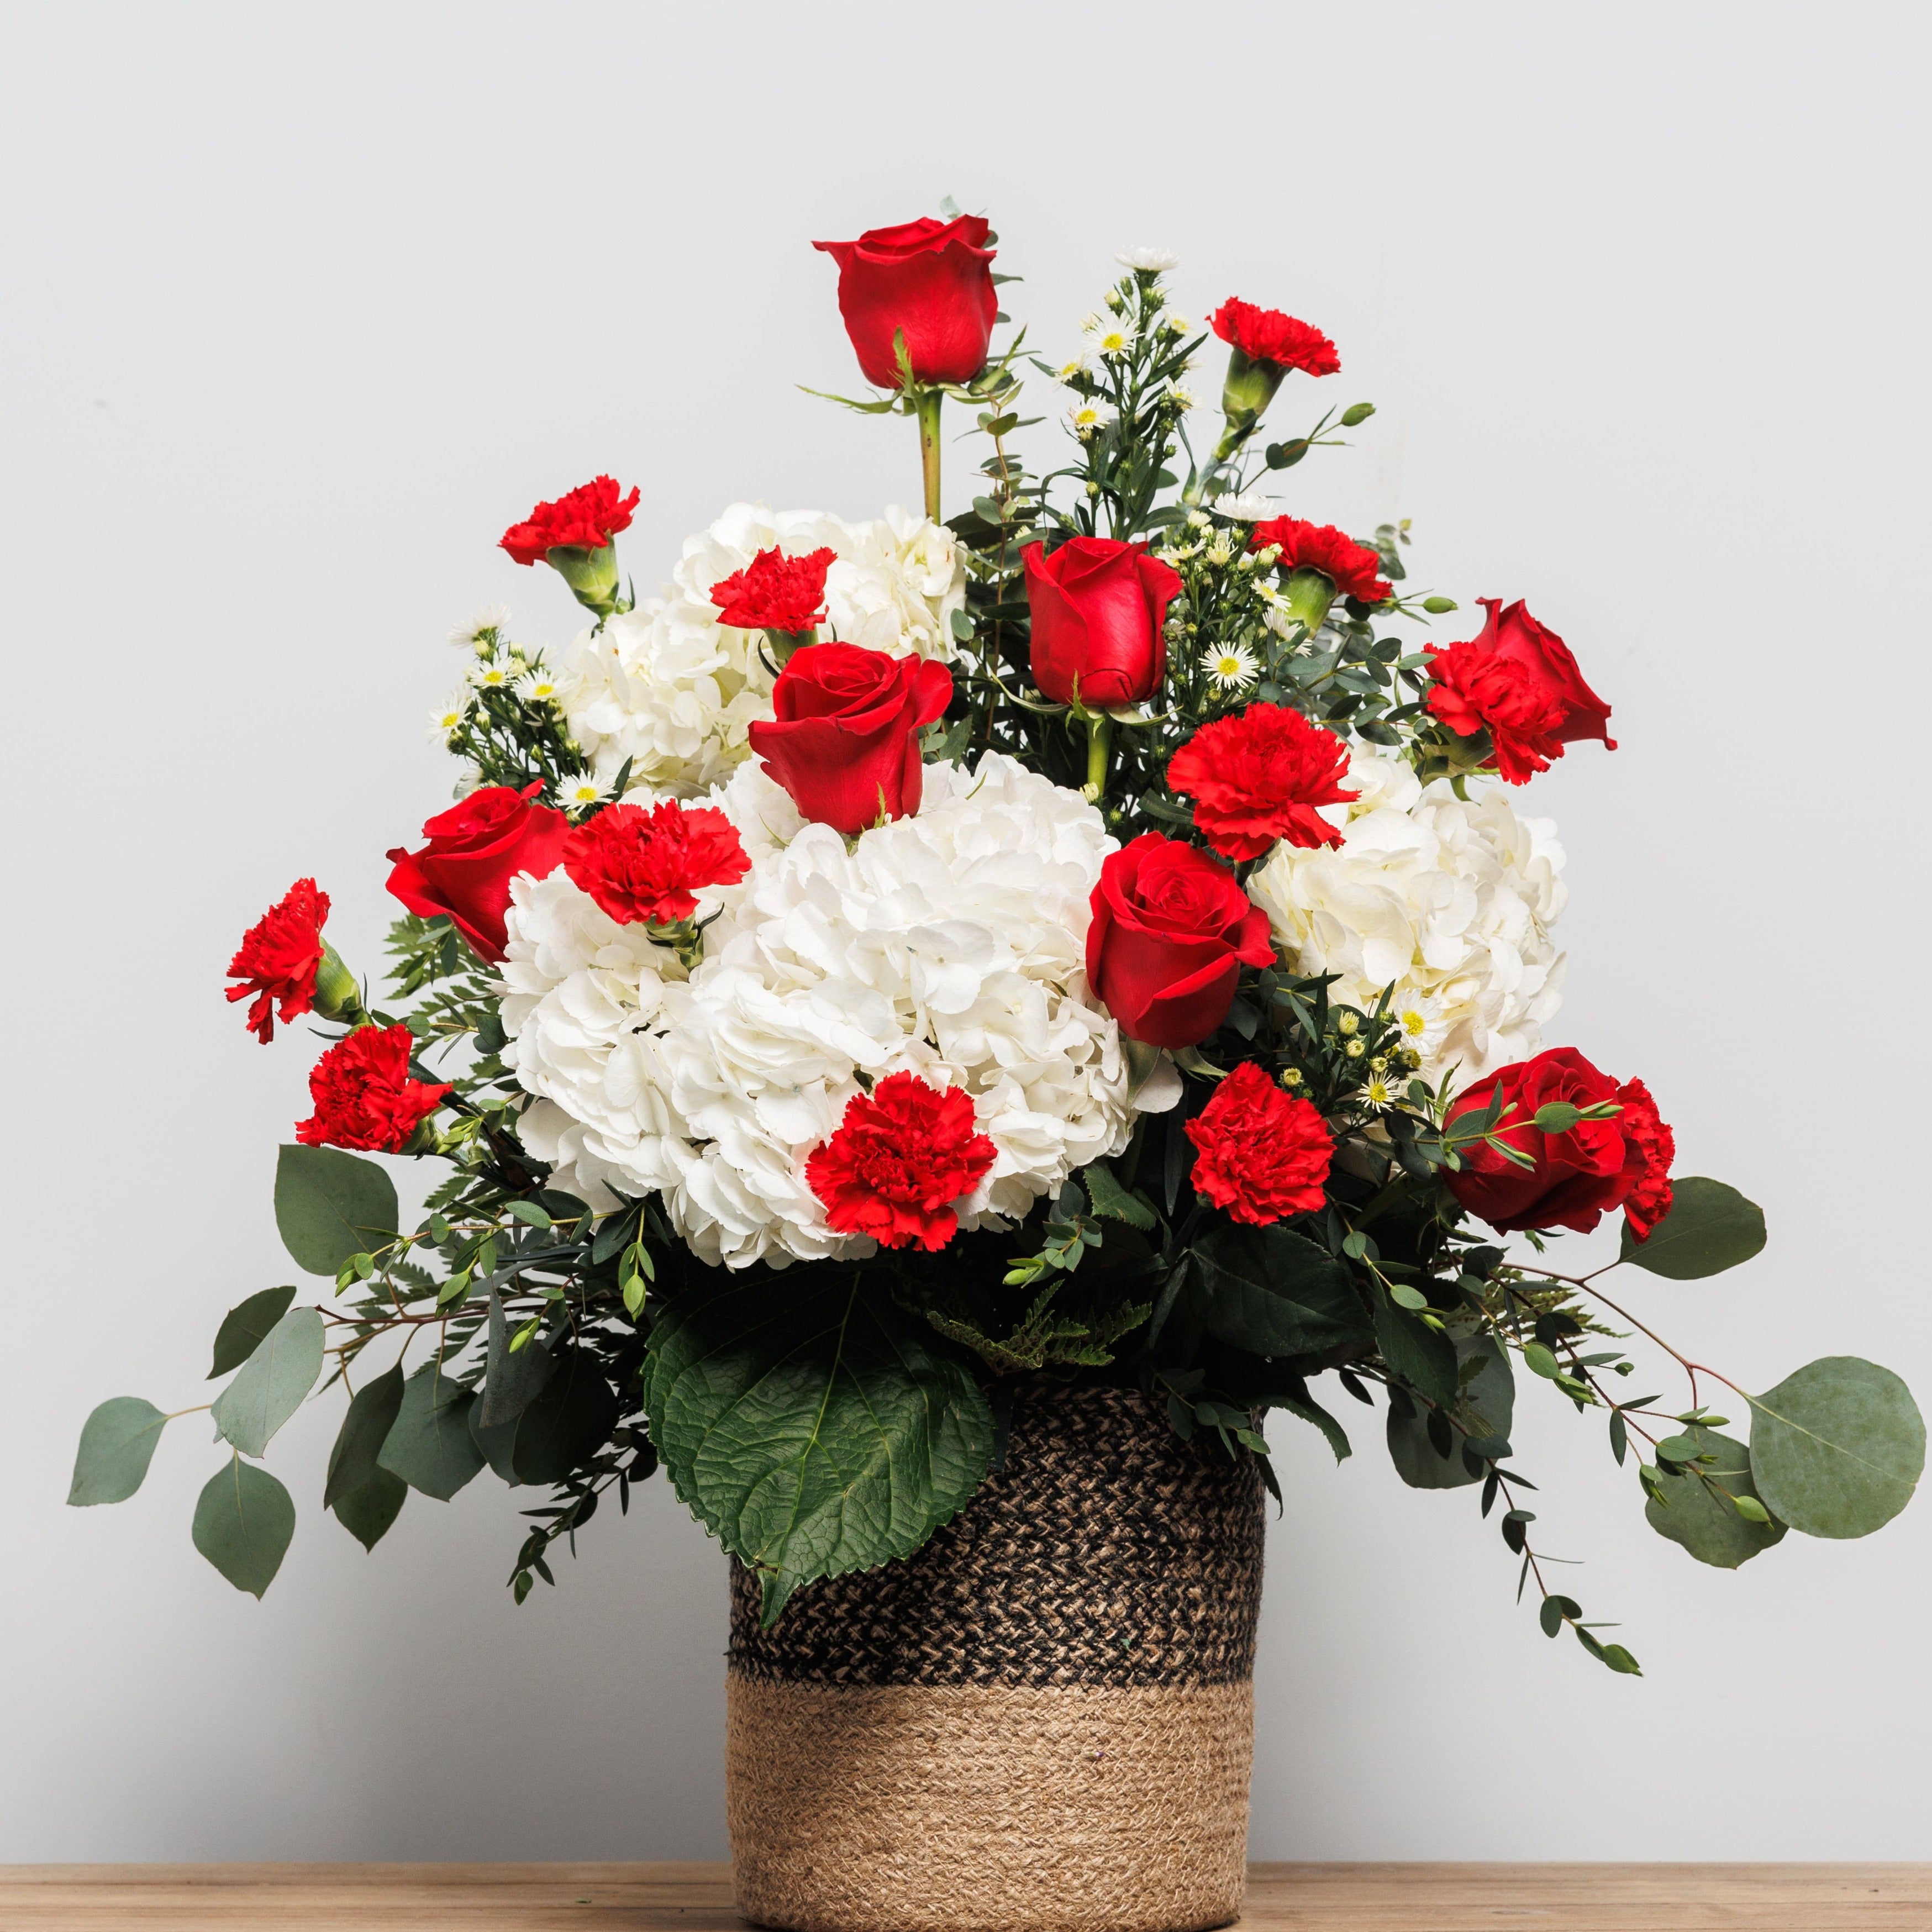 A basket arrangement with red roses, red carnations and white hydrangeas.